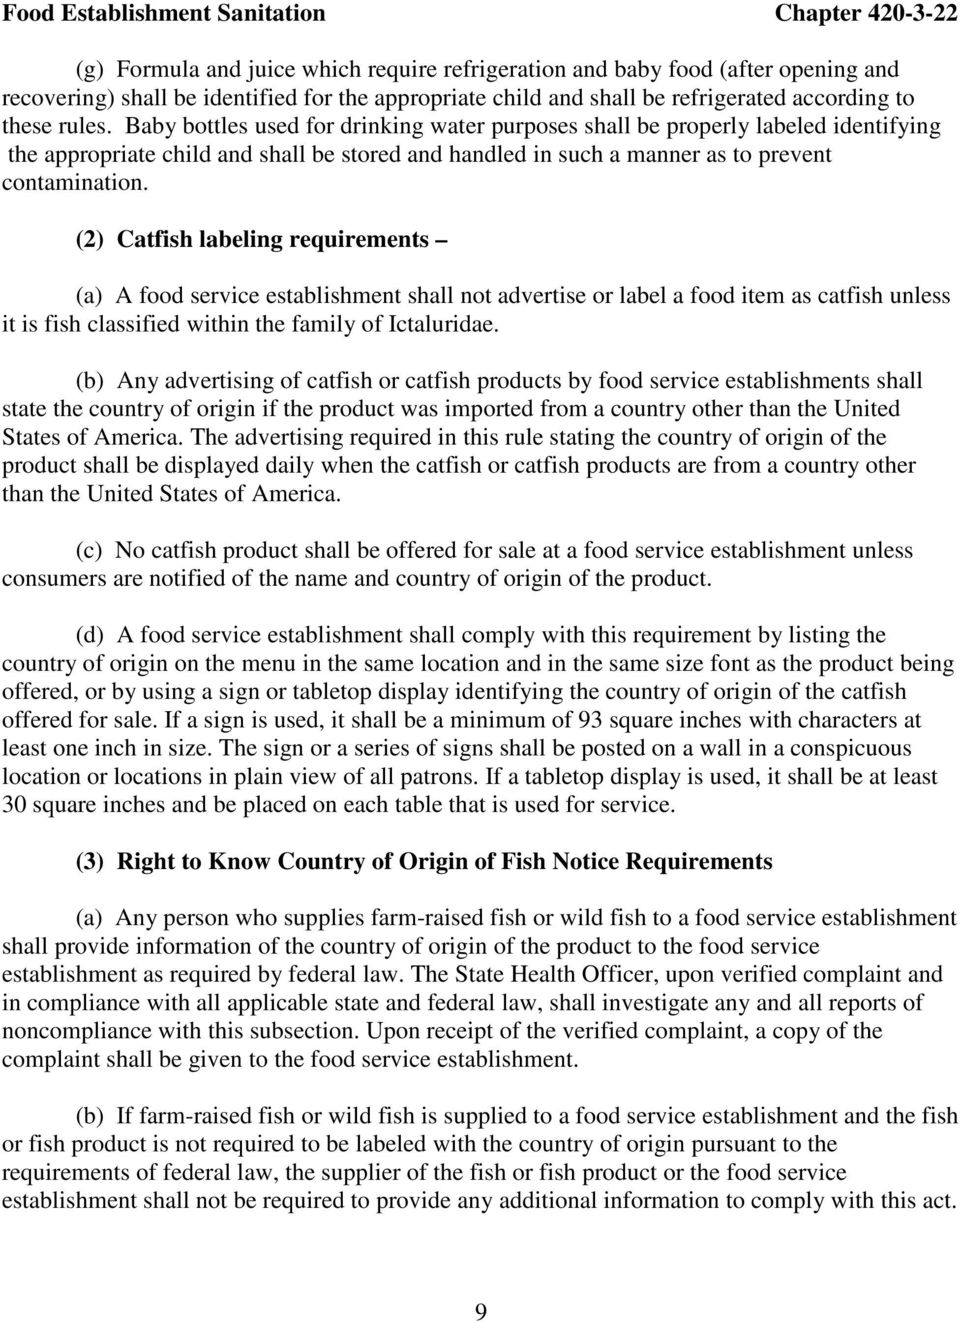 (2) Catfish labeling requirements (a) A food service establishment shall not advertise or label a food item as catfish unless it is fish classified within the family of Ictaluridae.